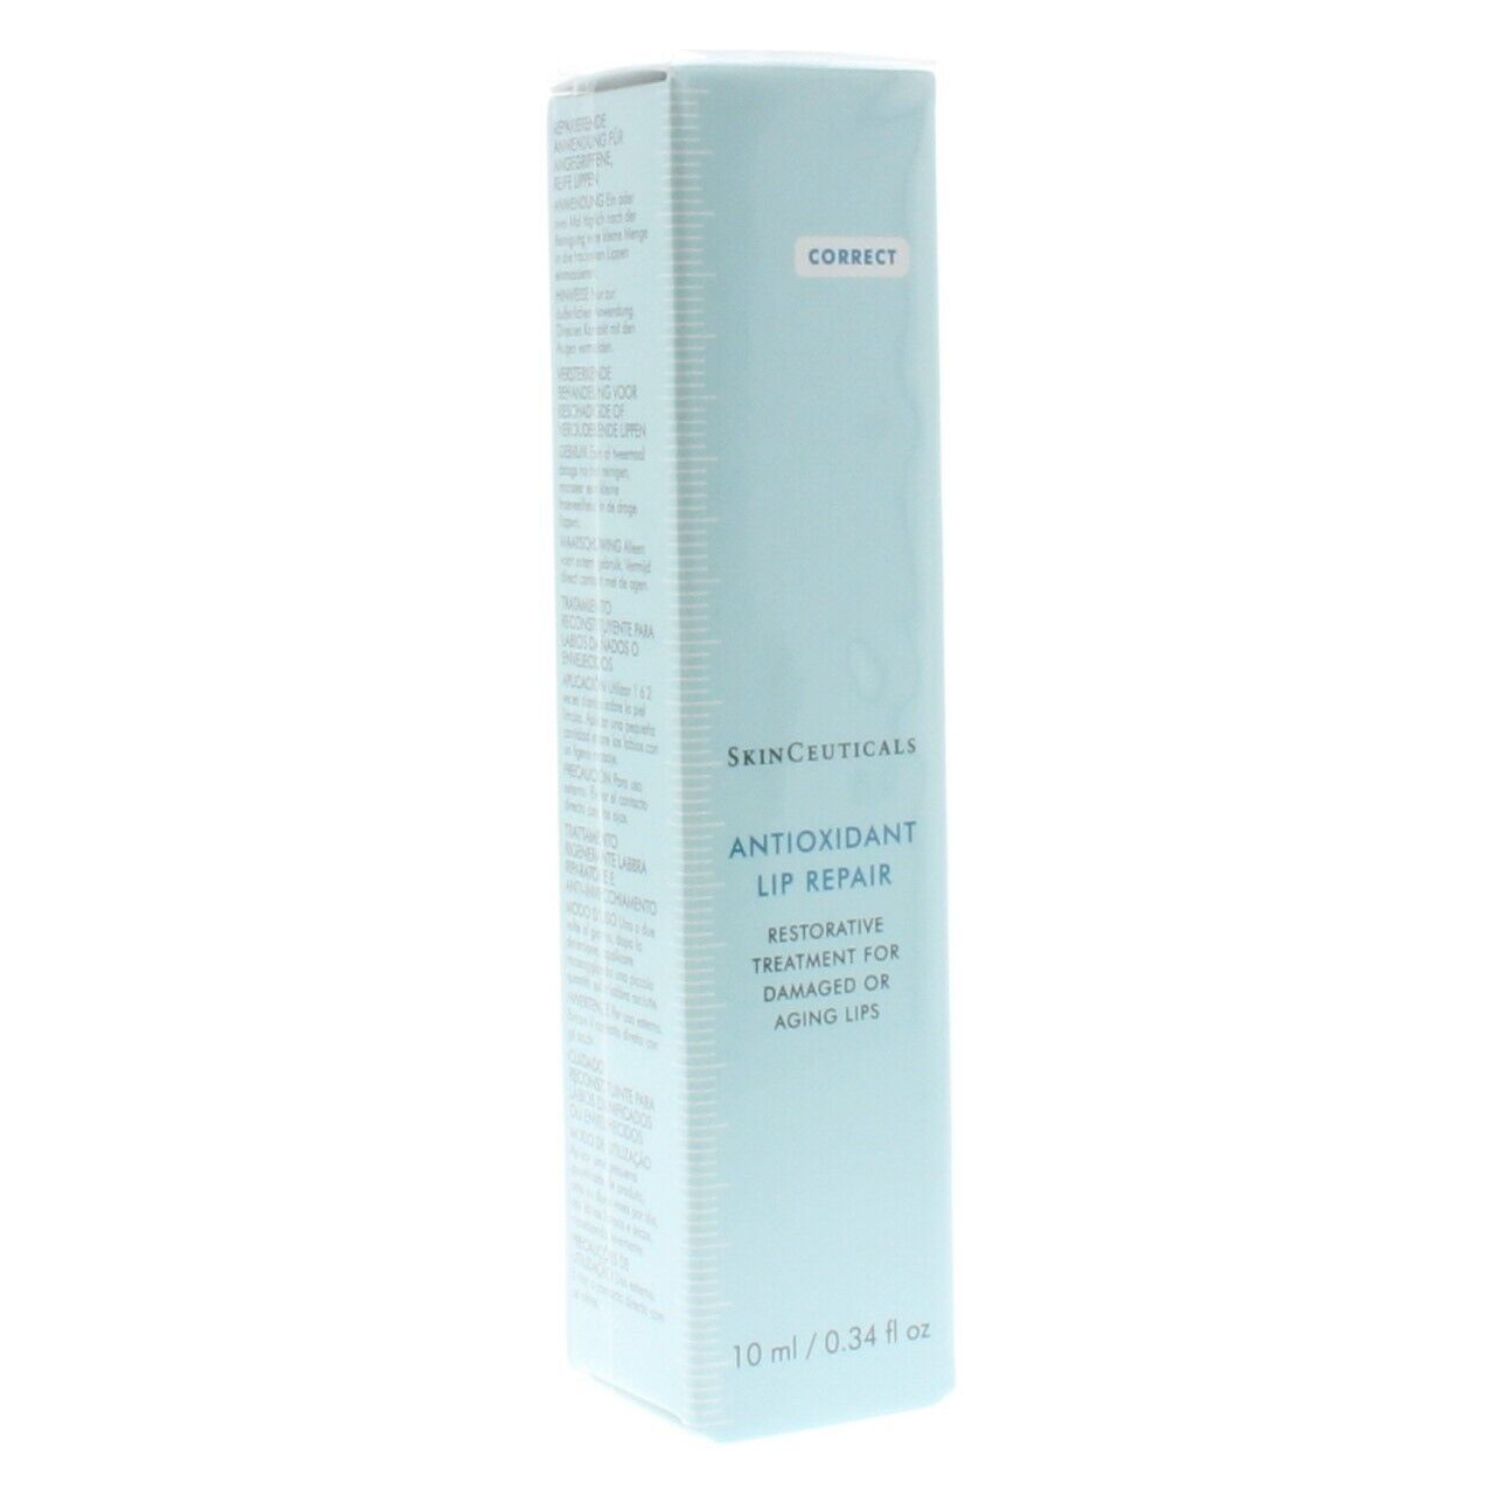 SkinCeuticals Antioxidant Lip Repair for Damaged or Aging Lips 0.34 oz - image 4 of 5